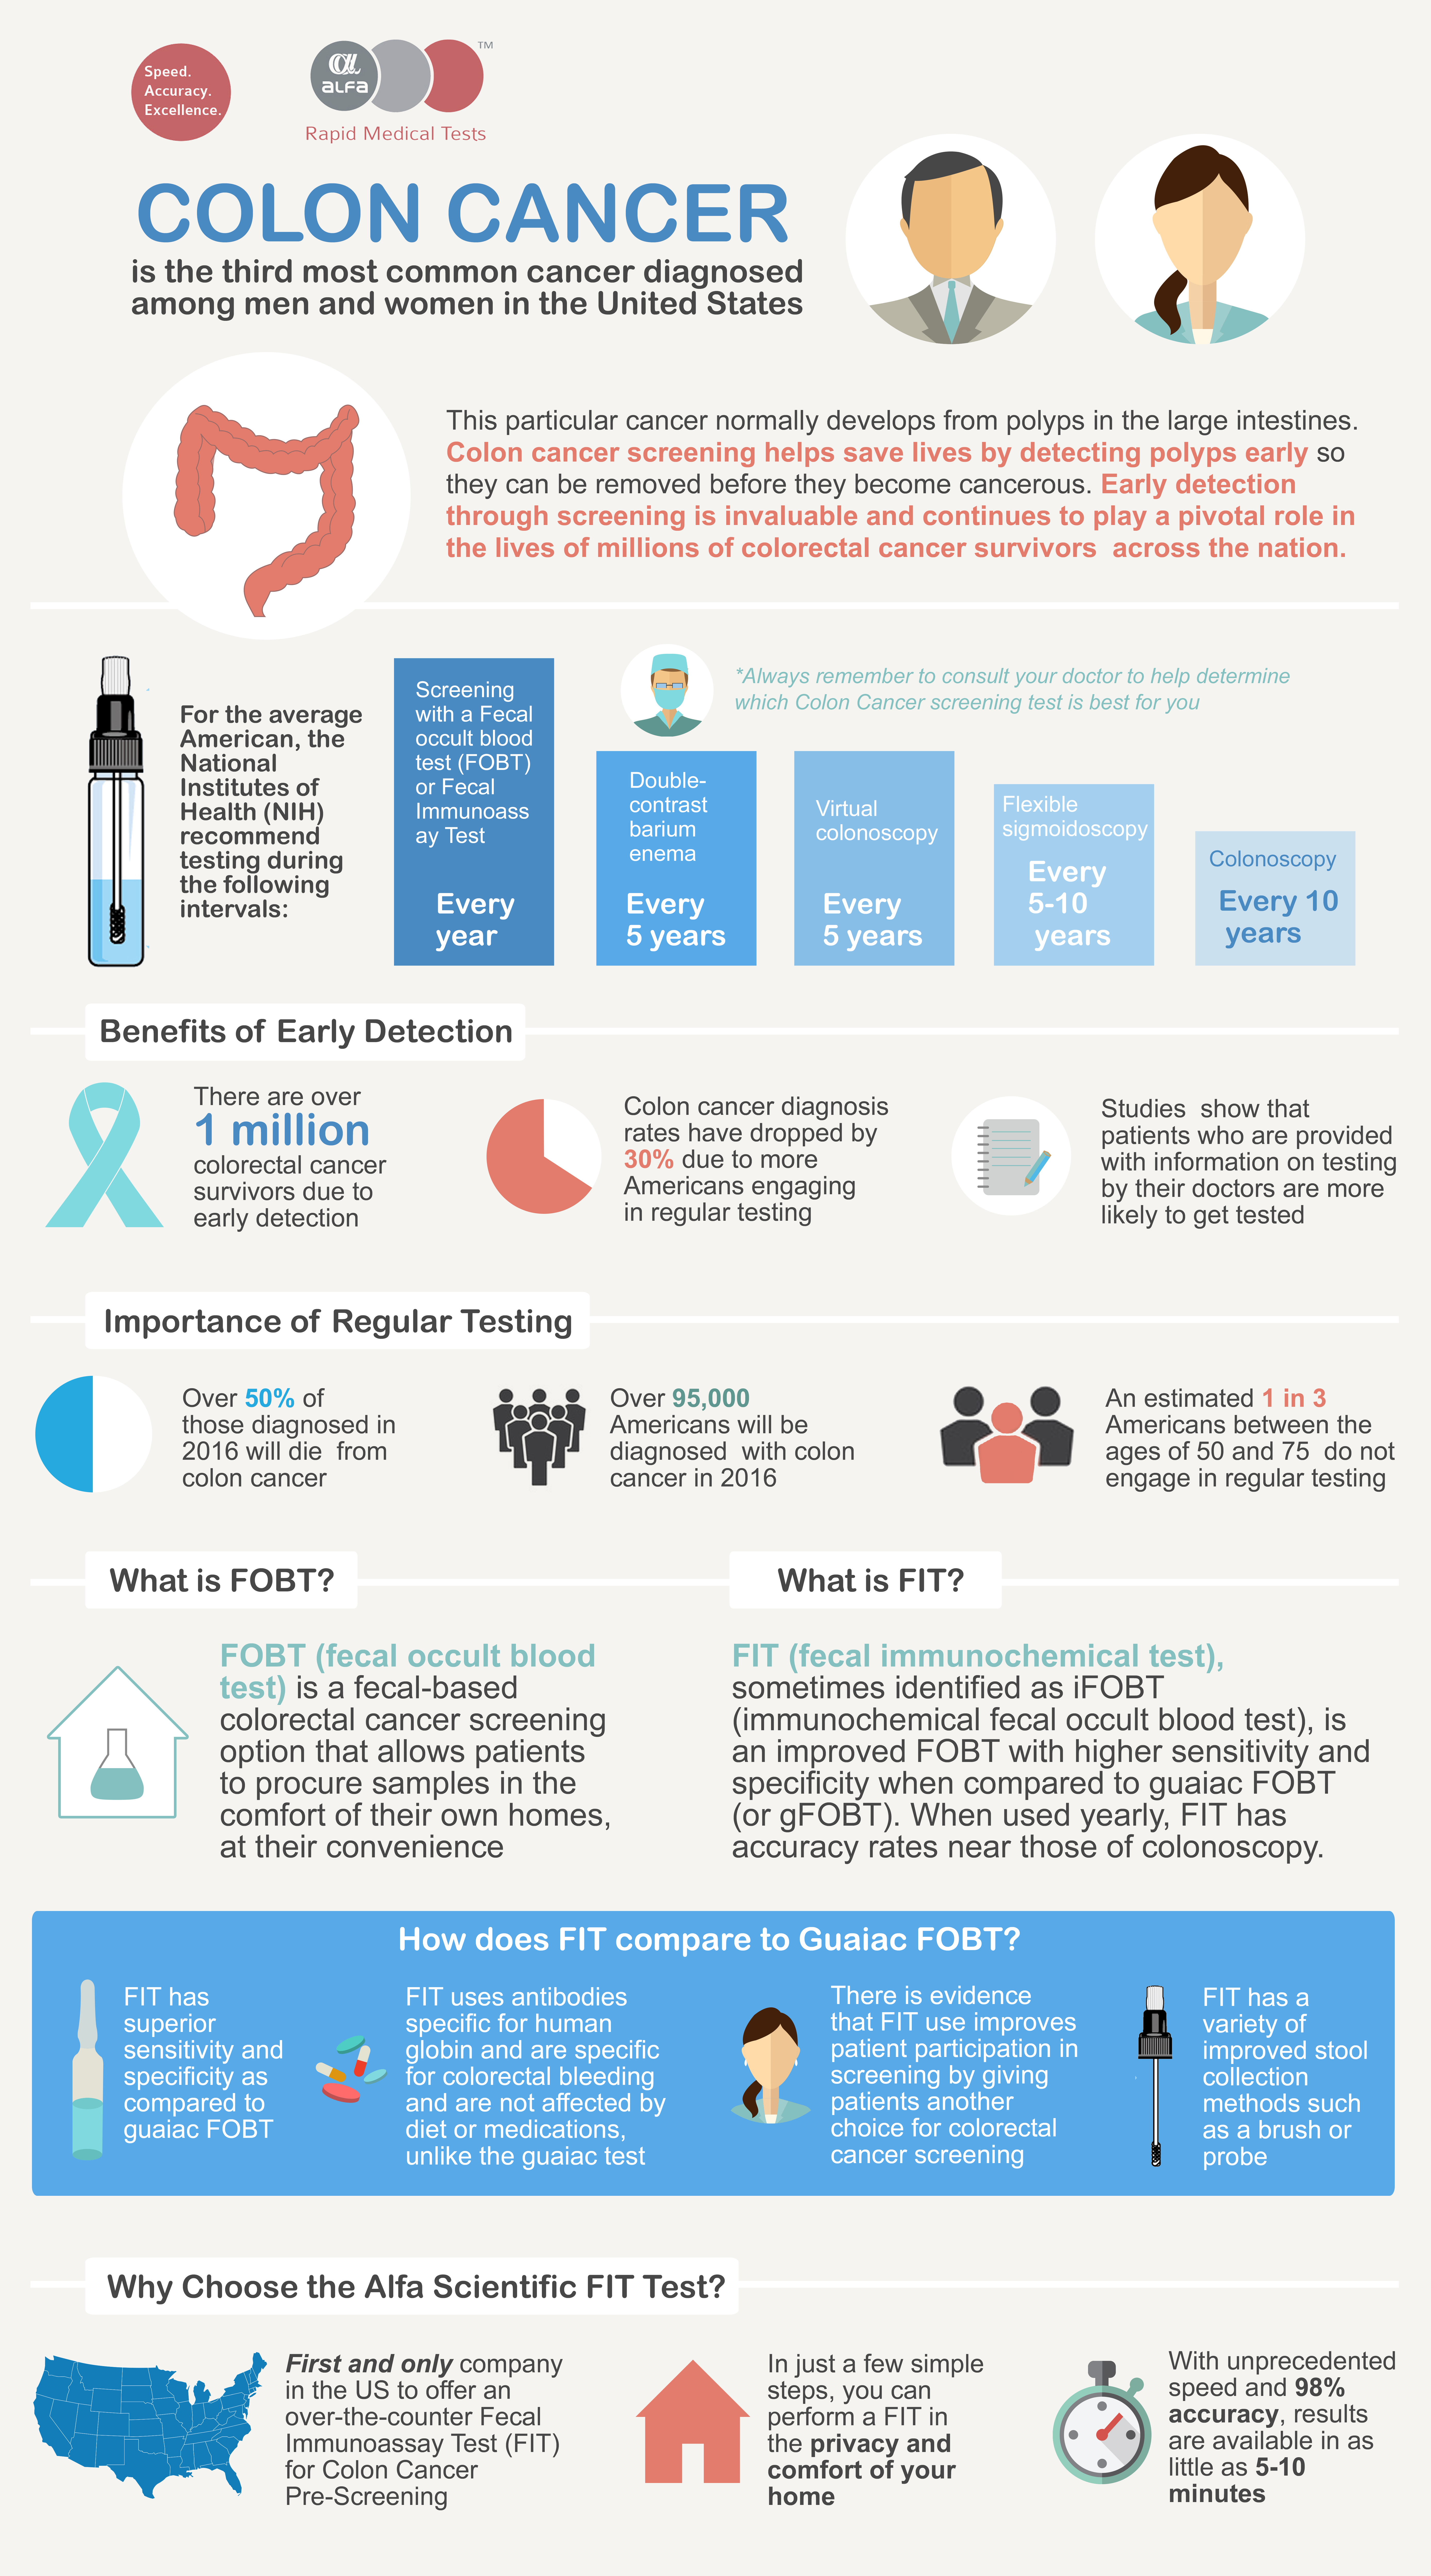 colorectal cancer infographic